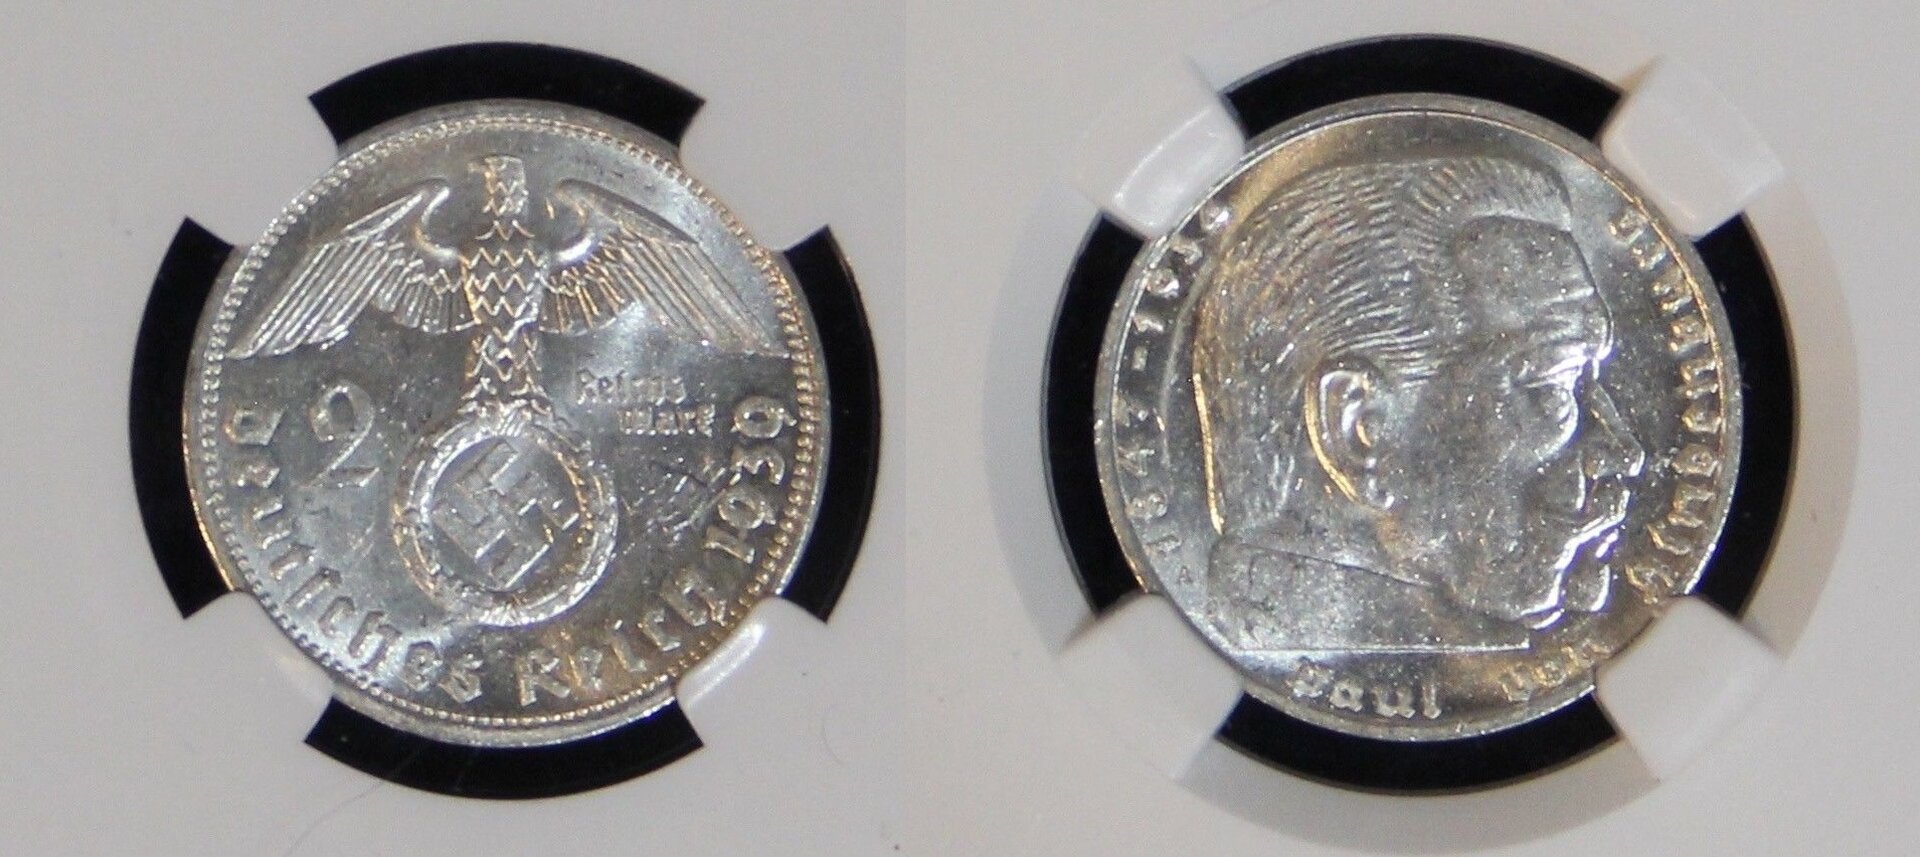 1939-A NGC Au-58 Germany Two Reichsmark Silver Coin WWII Third Reich.jpg